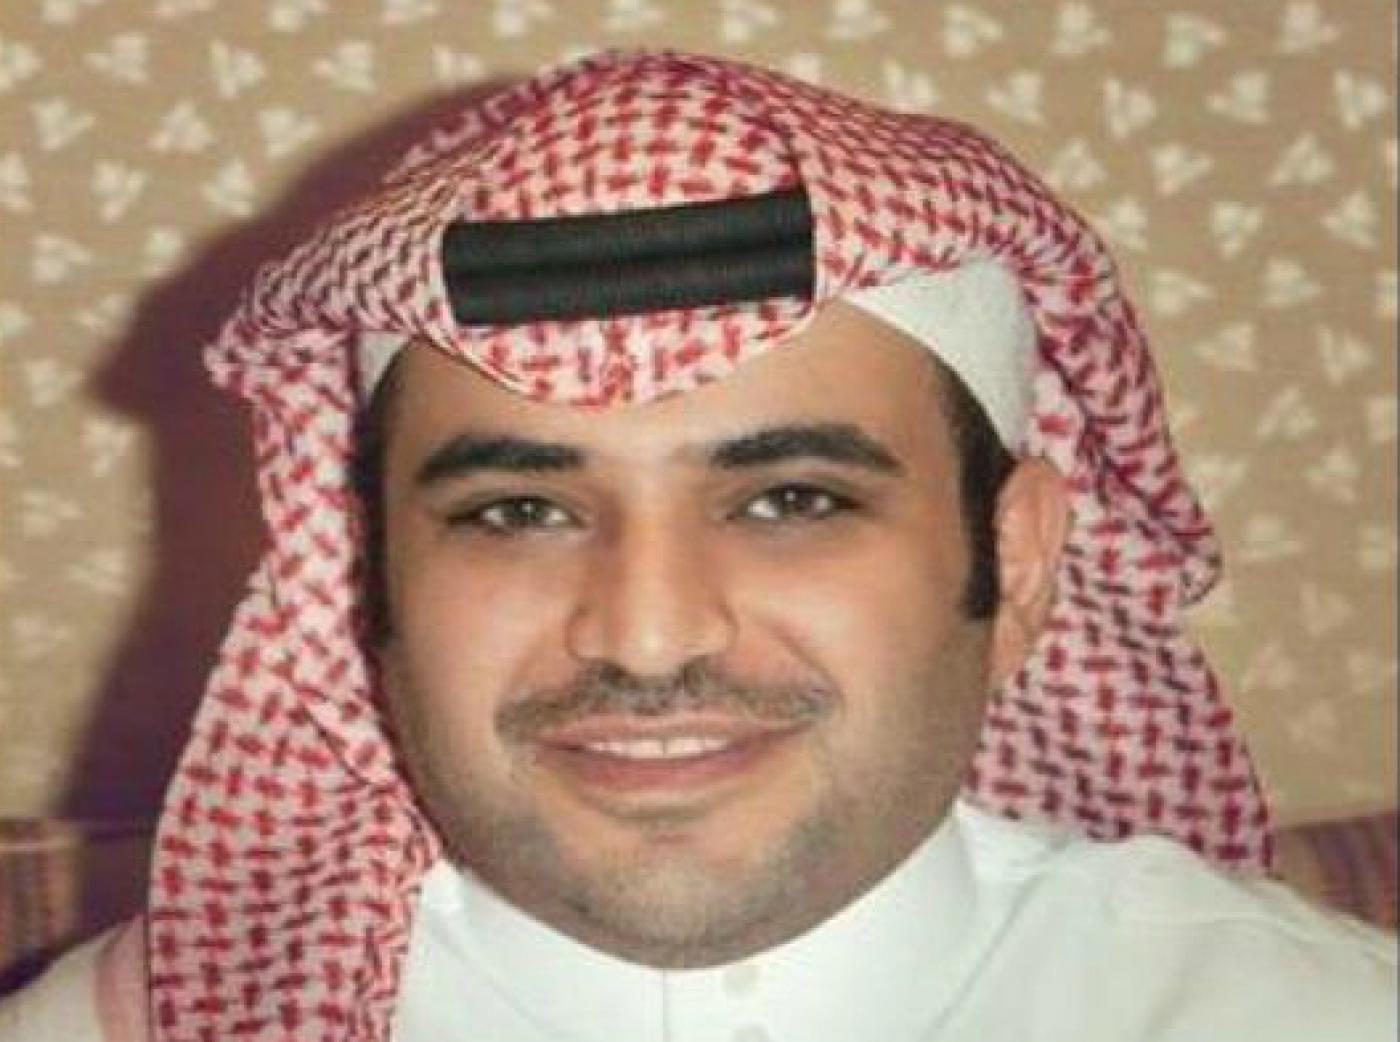 Saudi and Turkish sources told Reuters that Qahtani skyped into the Istanbul consulate during Khashoggi's murder (Supplied)